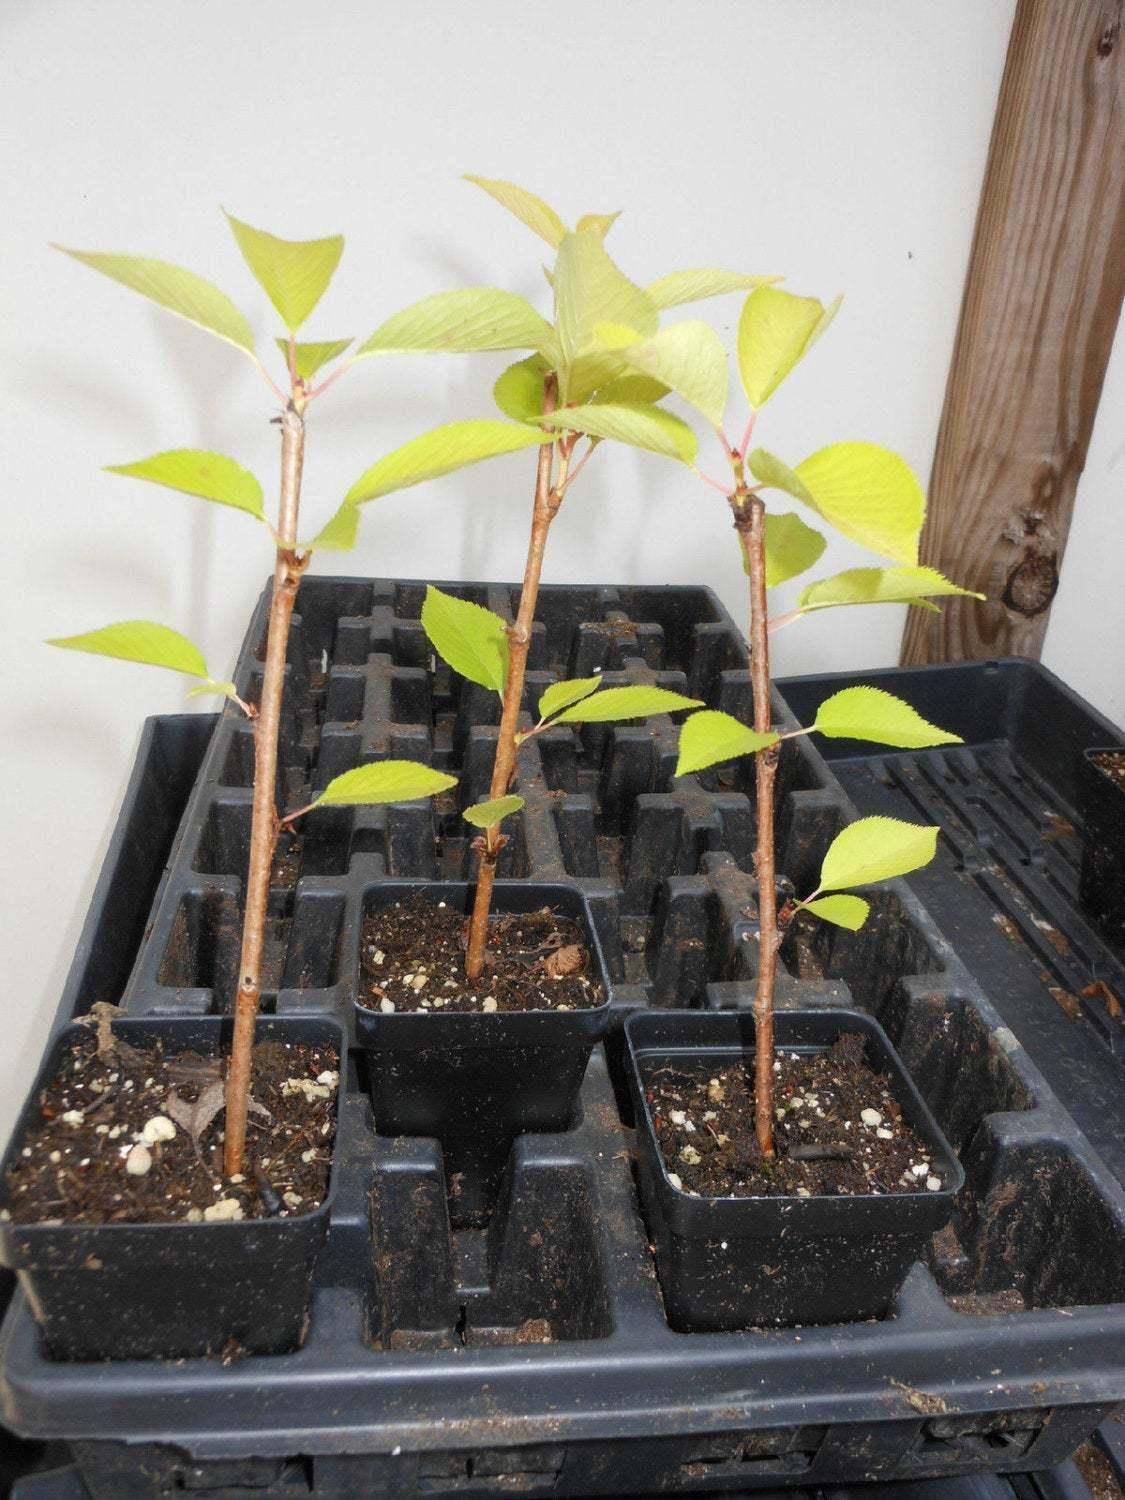 2 Yoshino Flowering Cherry Trees - Live Potted Plants - 6-12" Tall - 3" Pots - The Nursery Center